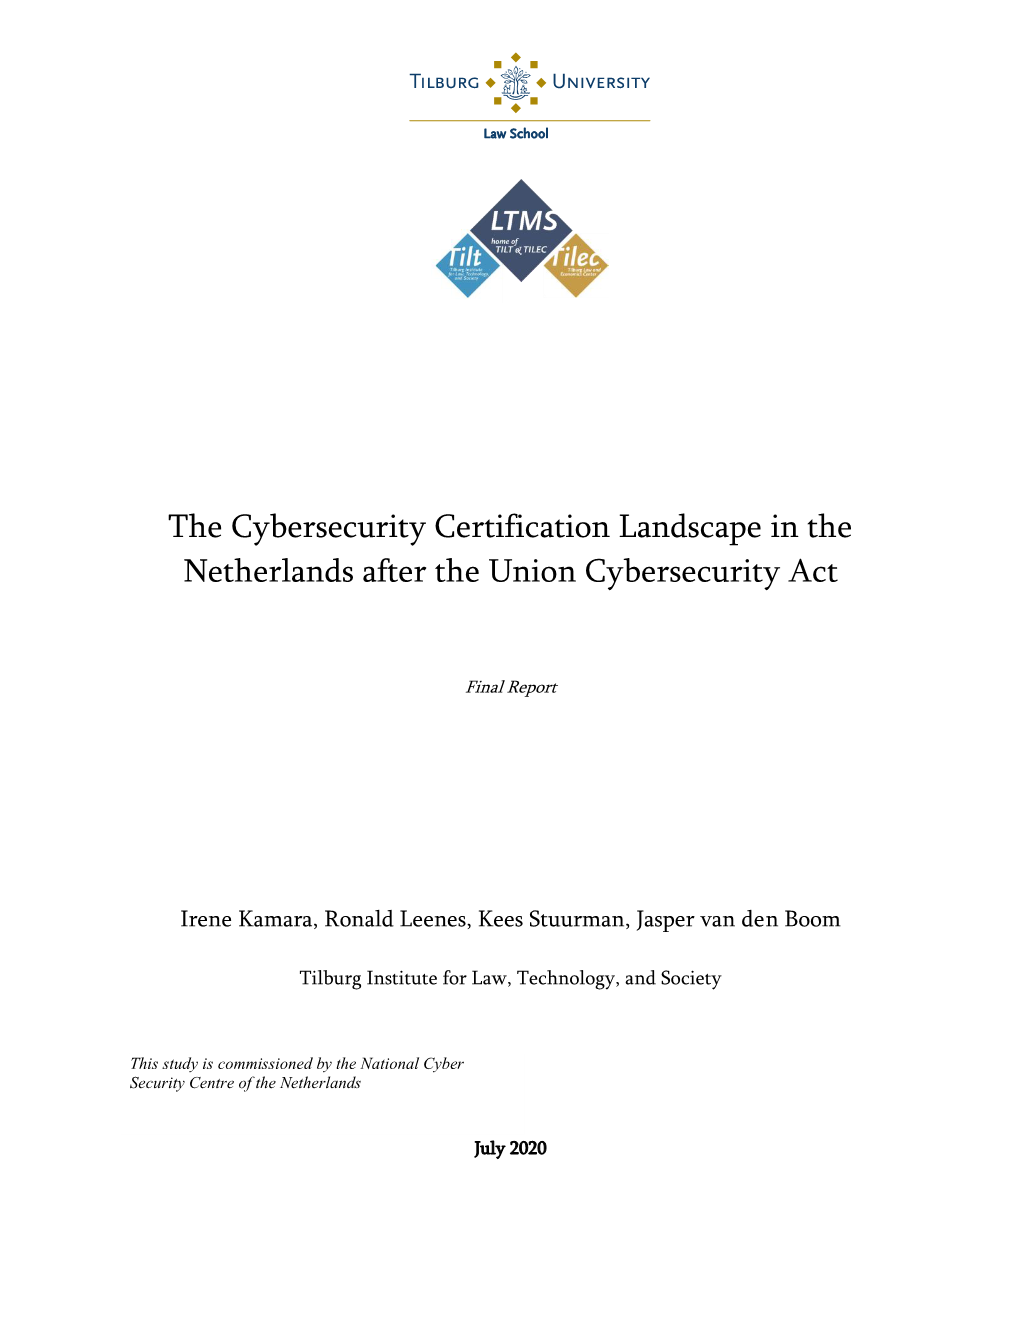 The Cybersecurity Certification Landscape in the Netherlands After the Union Cybersecurity Act